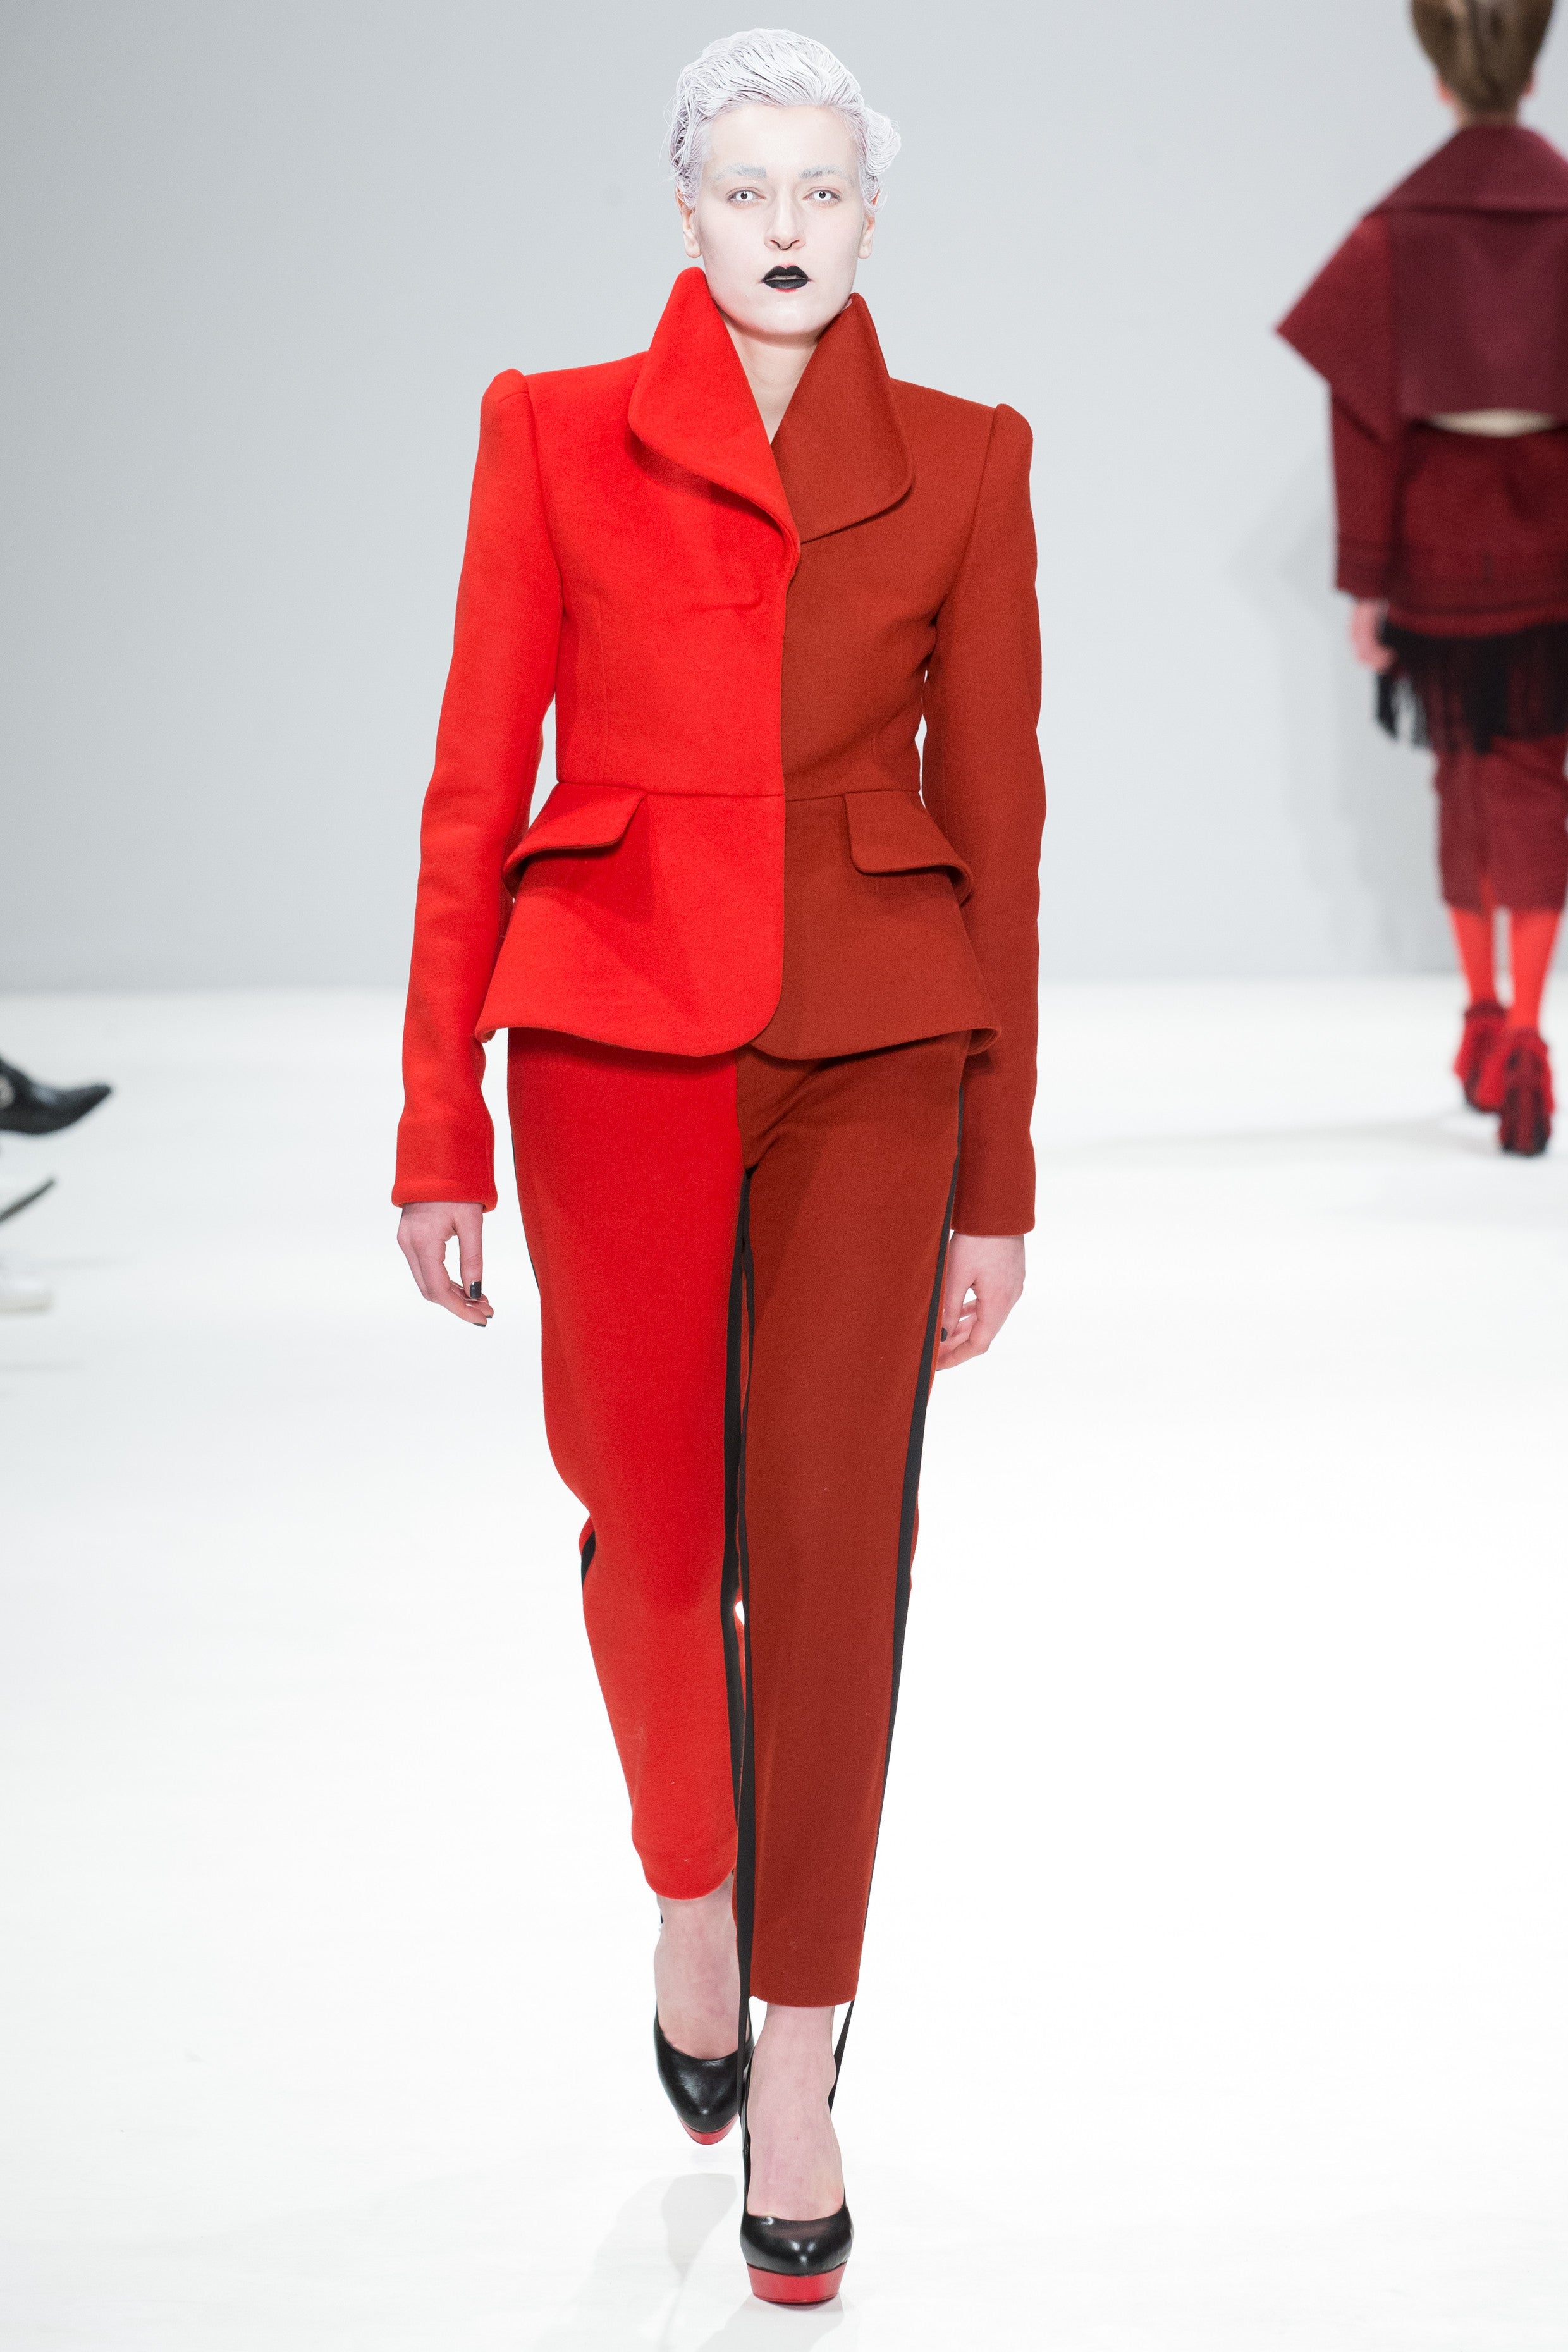 CIMONE's AW17 Dietrich jacket worn with the Pipe trouser on the fashion scout catwalk during London Fashion Week. Named after Marlene! This sculptural tailored and fitted suit jacket is fabricated in two-tone  red and burnt orange wool. 